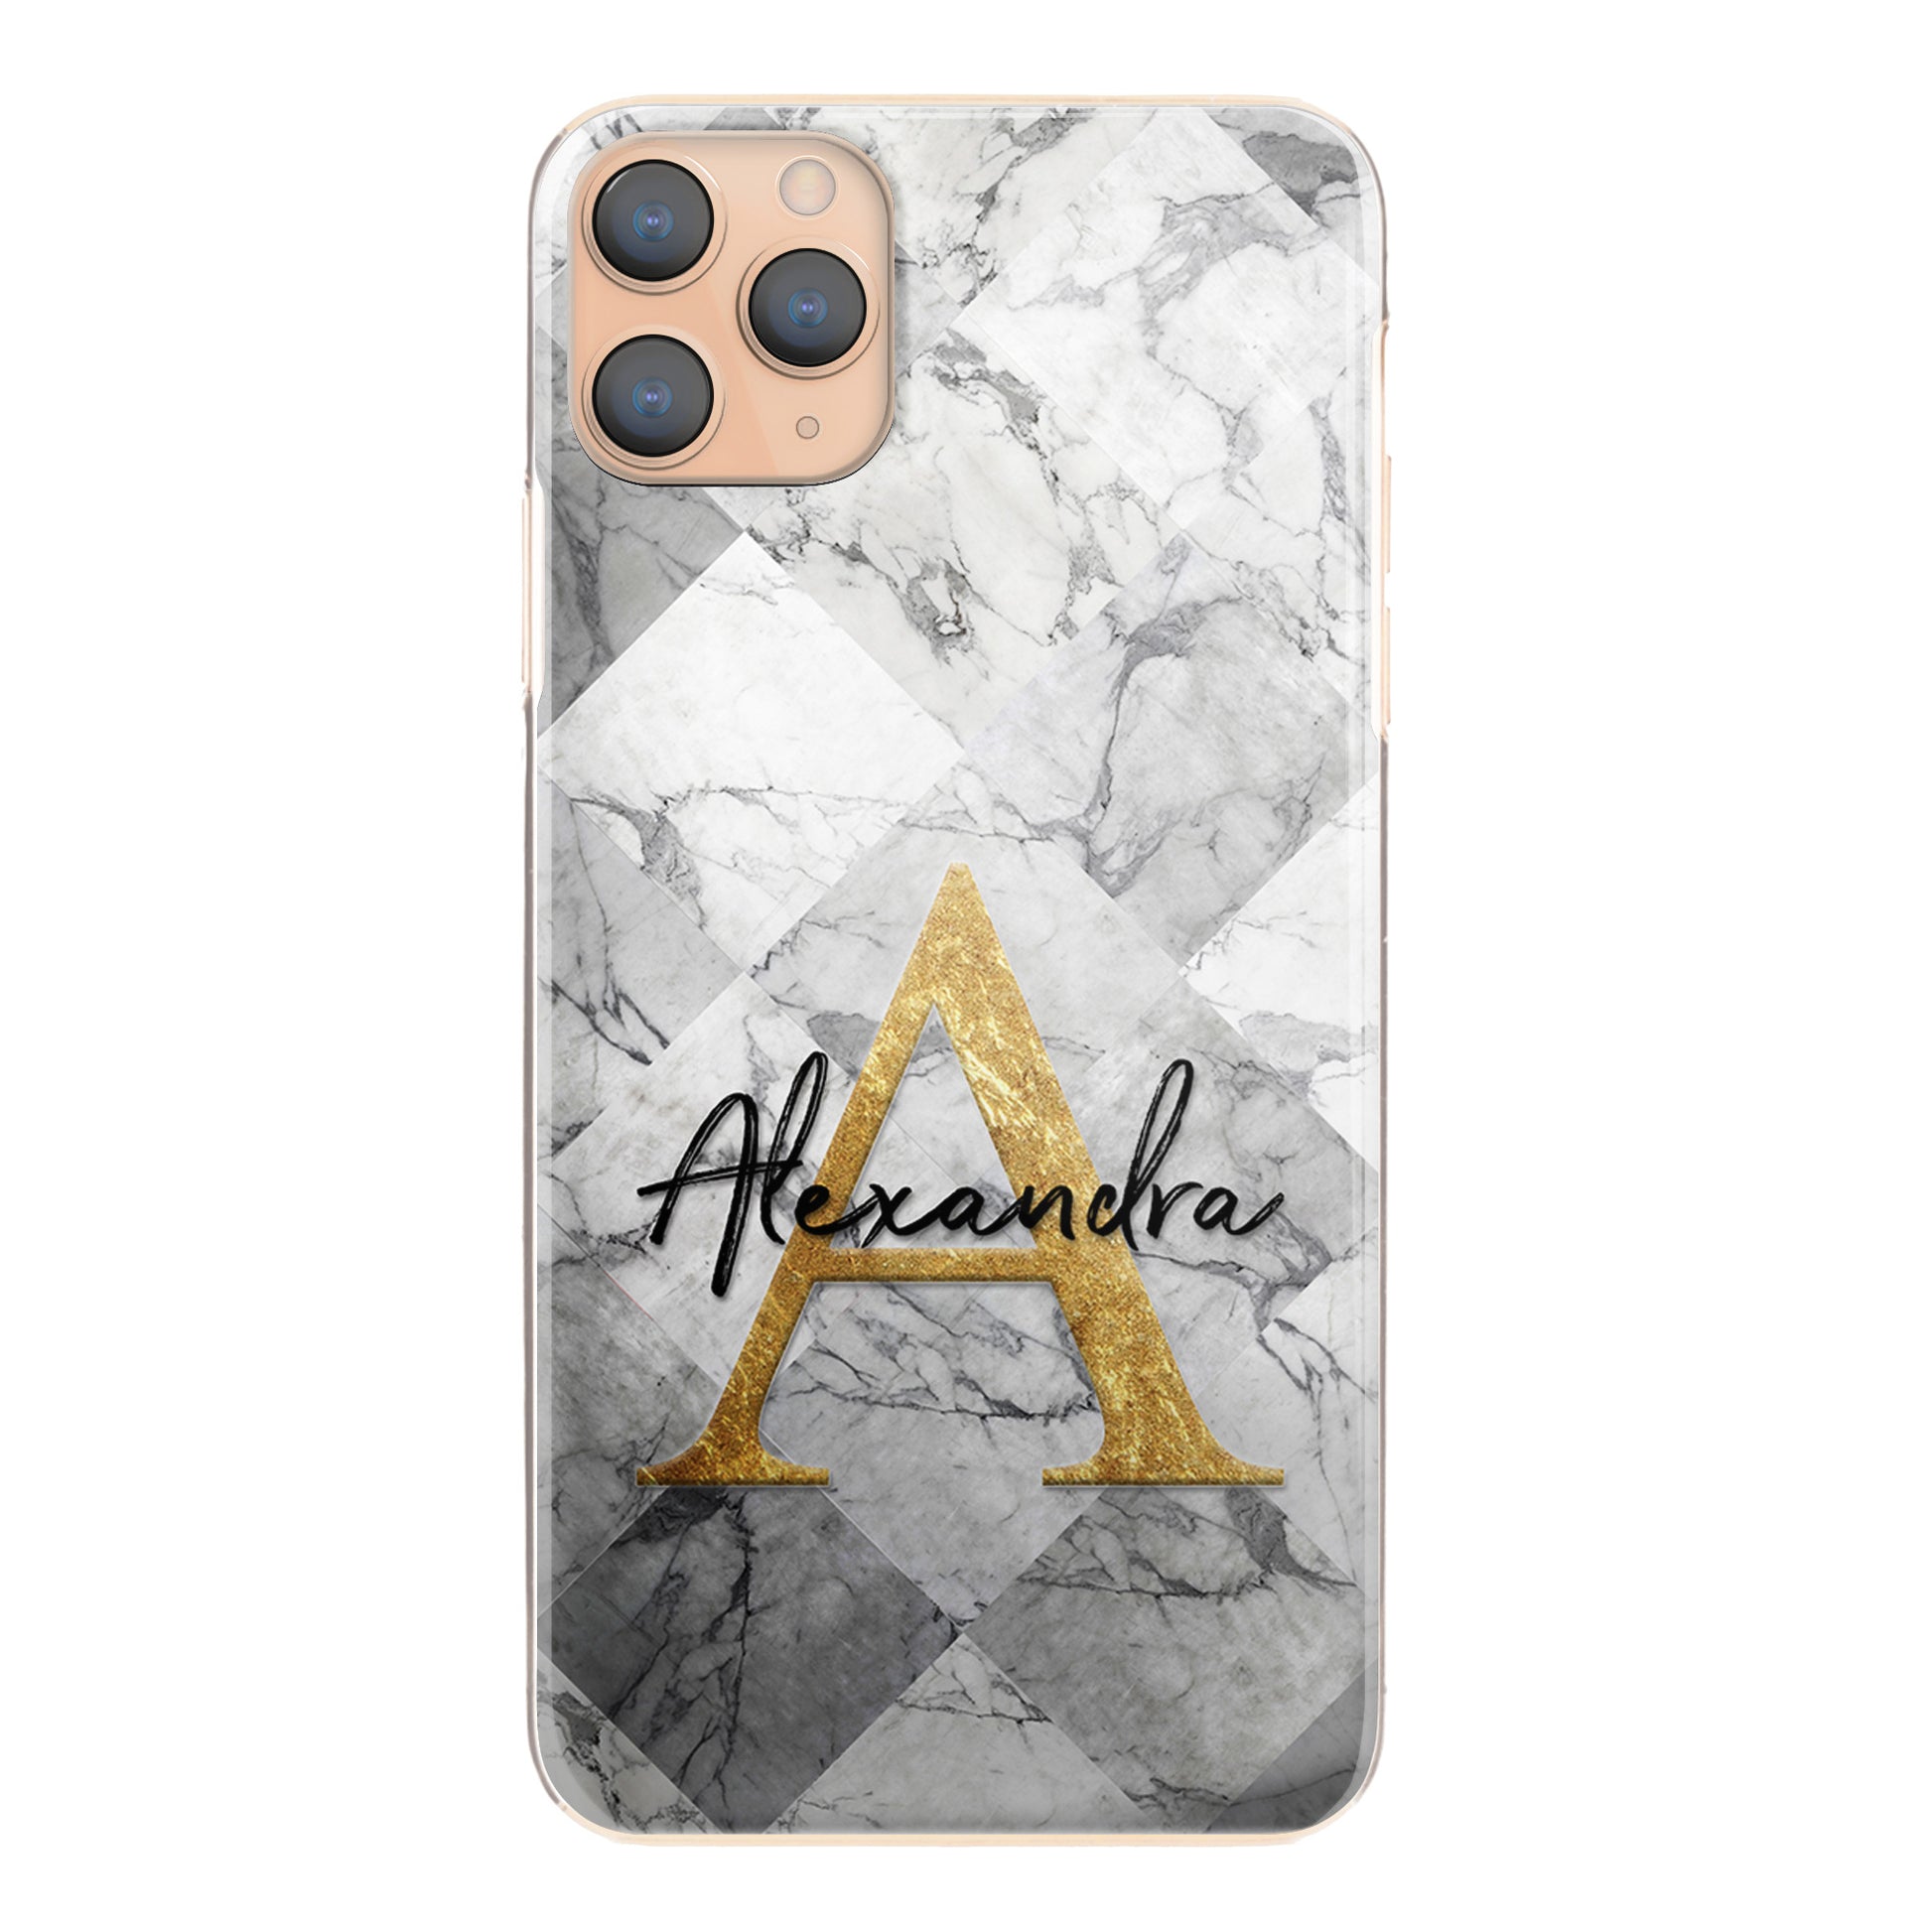 Personalised Nokia Phone Hard Case with Gold Monogram and Stylish Text on Patterned Grey Marble